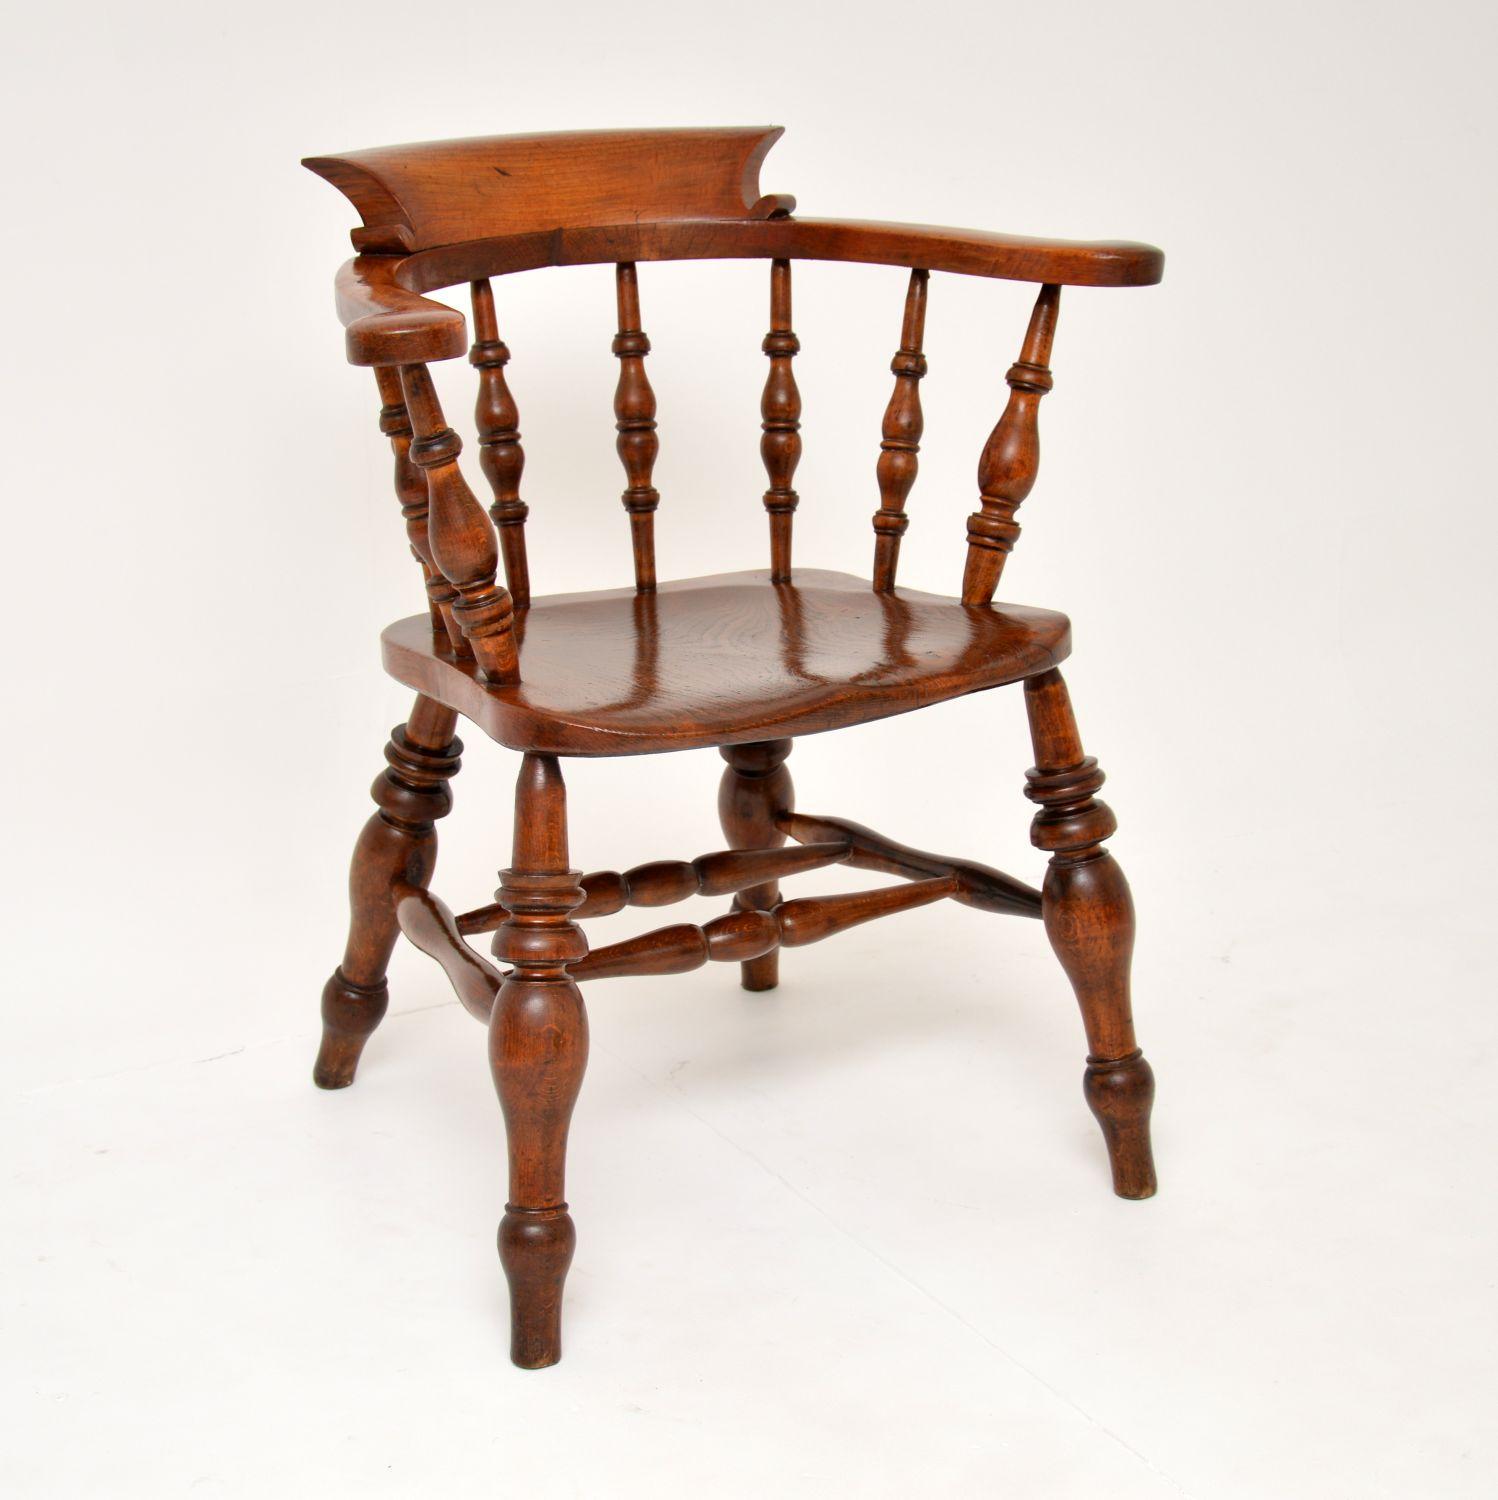 An excellent original Victorian period captains desk chair in solid elm. This was made in England, it dates from around the 1860-1880’s.

It is beautifully made and is of really high quality. The design is very sturdy and shapely, it has a very